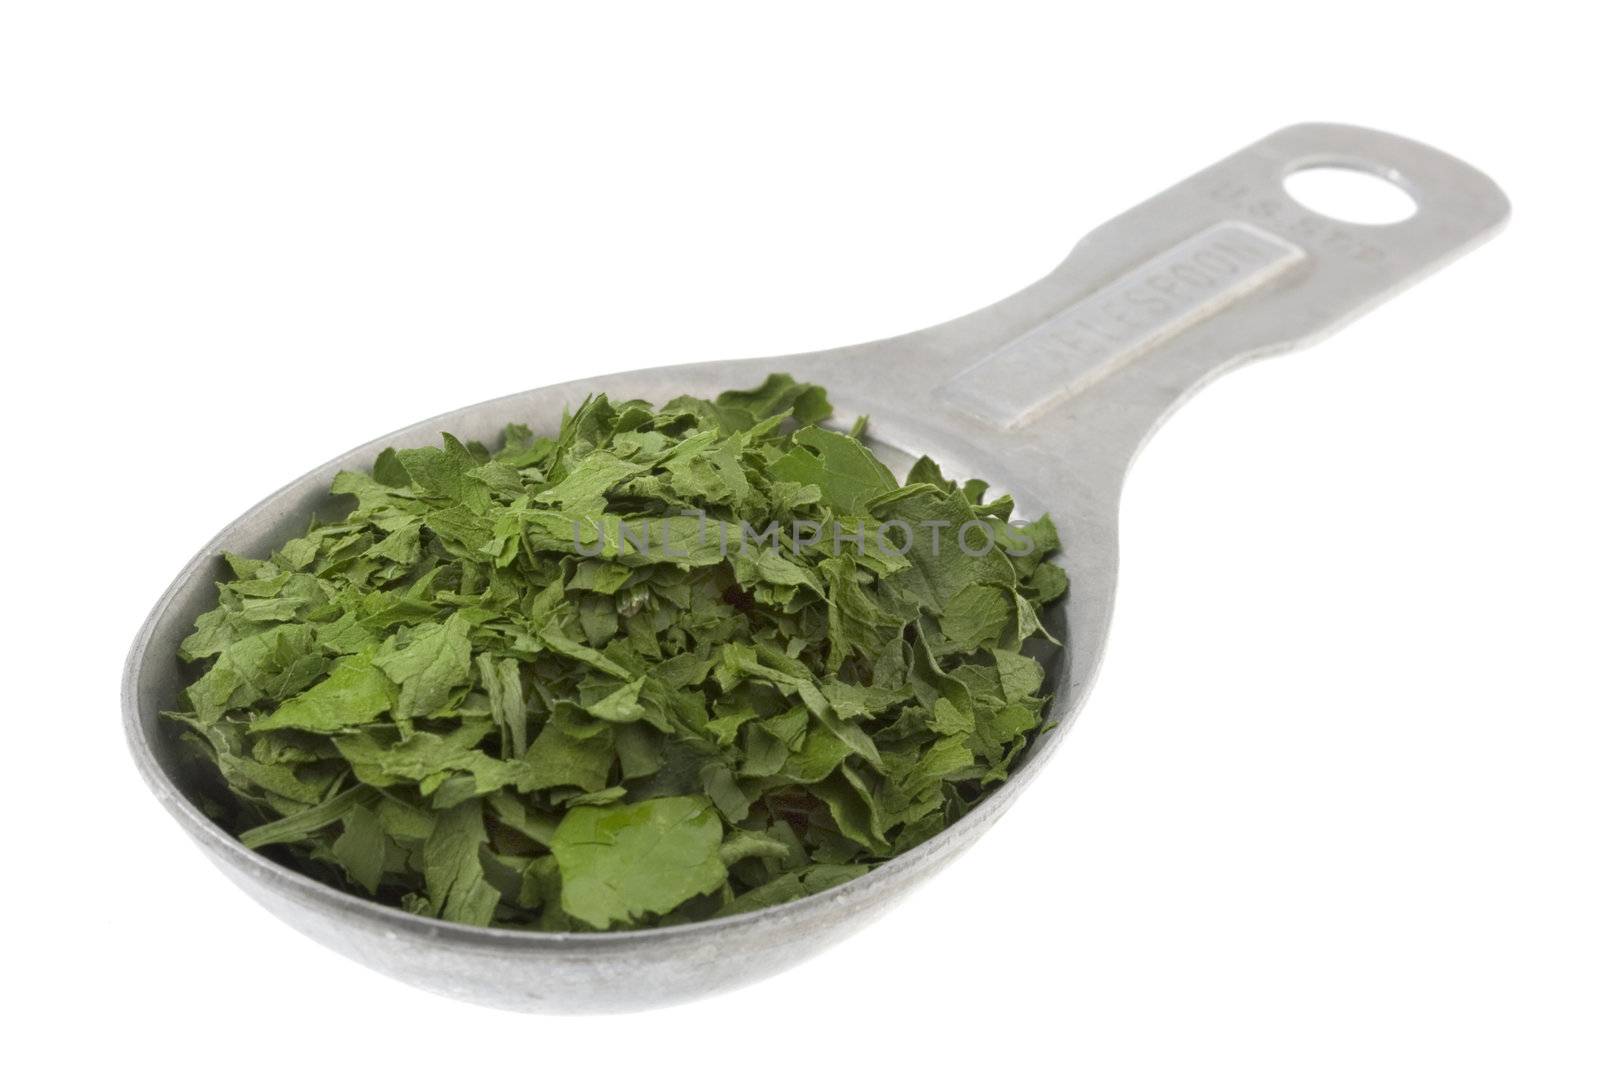 dried parsley weeds on aluminum measuring tablespoon isolated on white